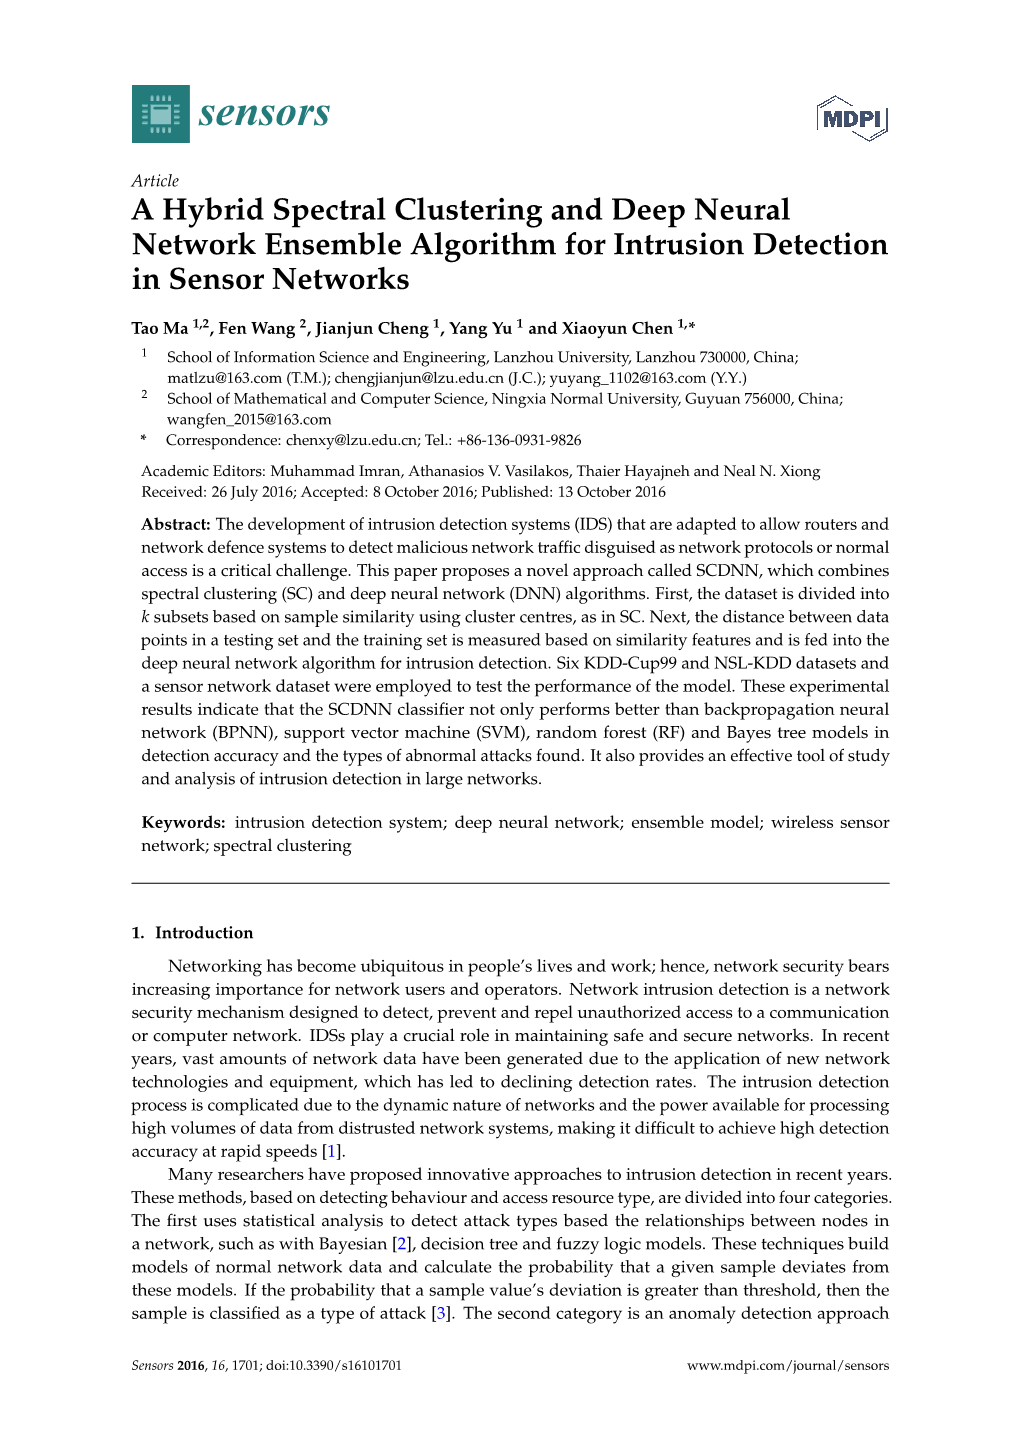 A Hybrid Spectral Clustering and Deep Neural Network Ensemble Algorithm for Intrusion Detection in Sensor Networks